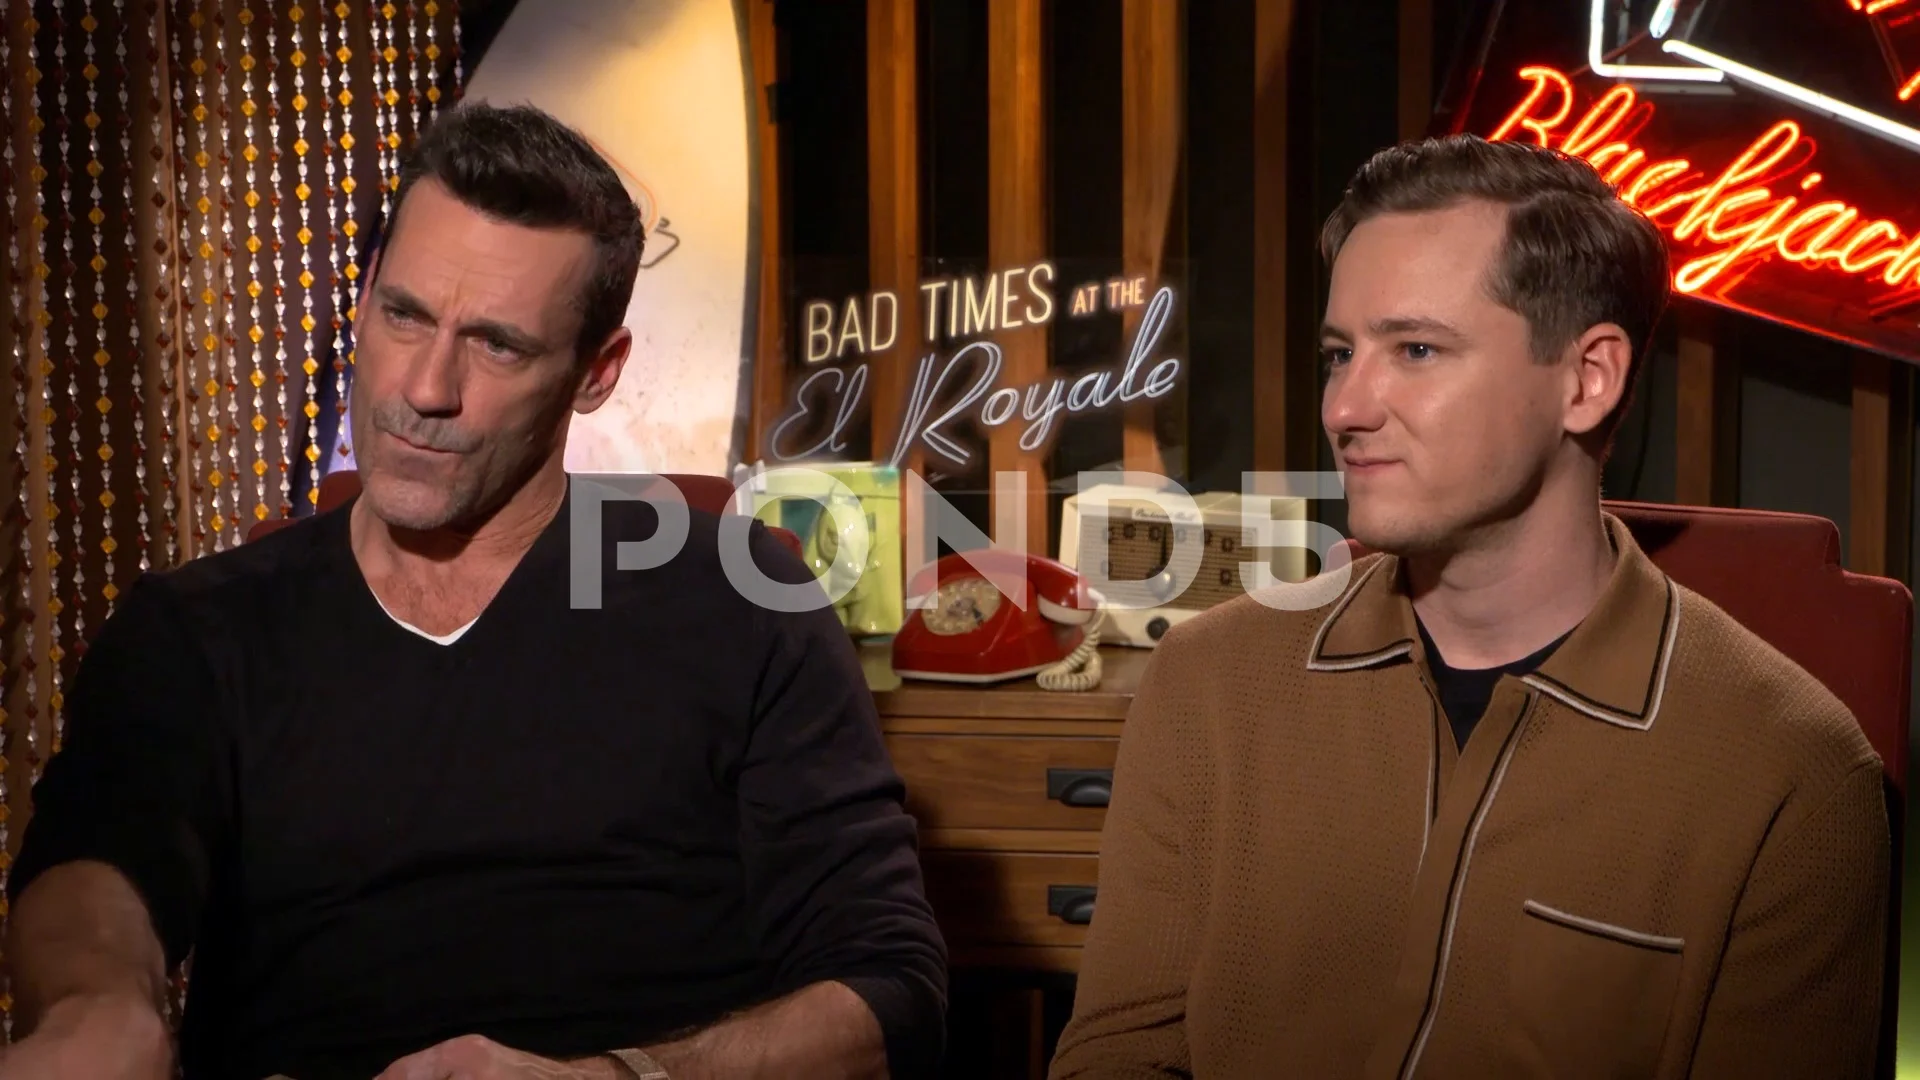 Jon Hamm And Lewis Pullman Talk About Their Movie Bad Times At El Royal Clip